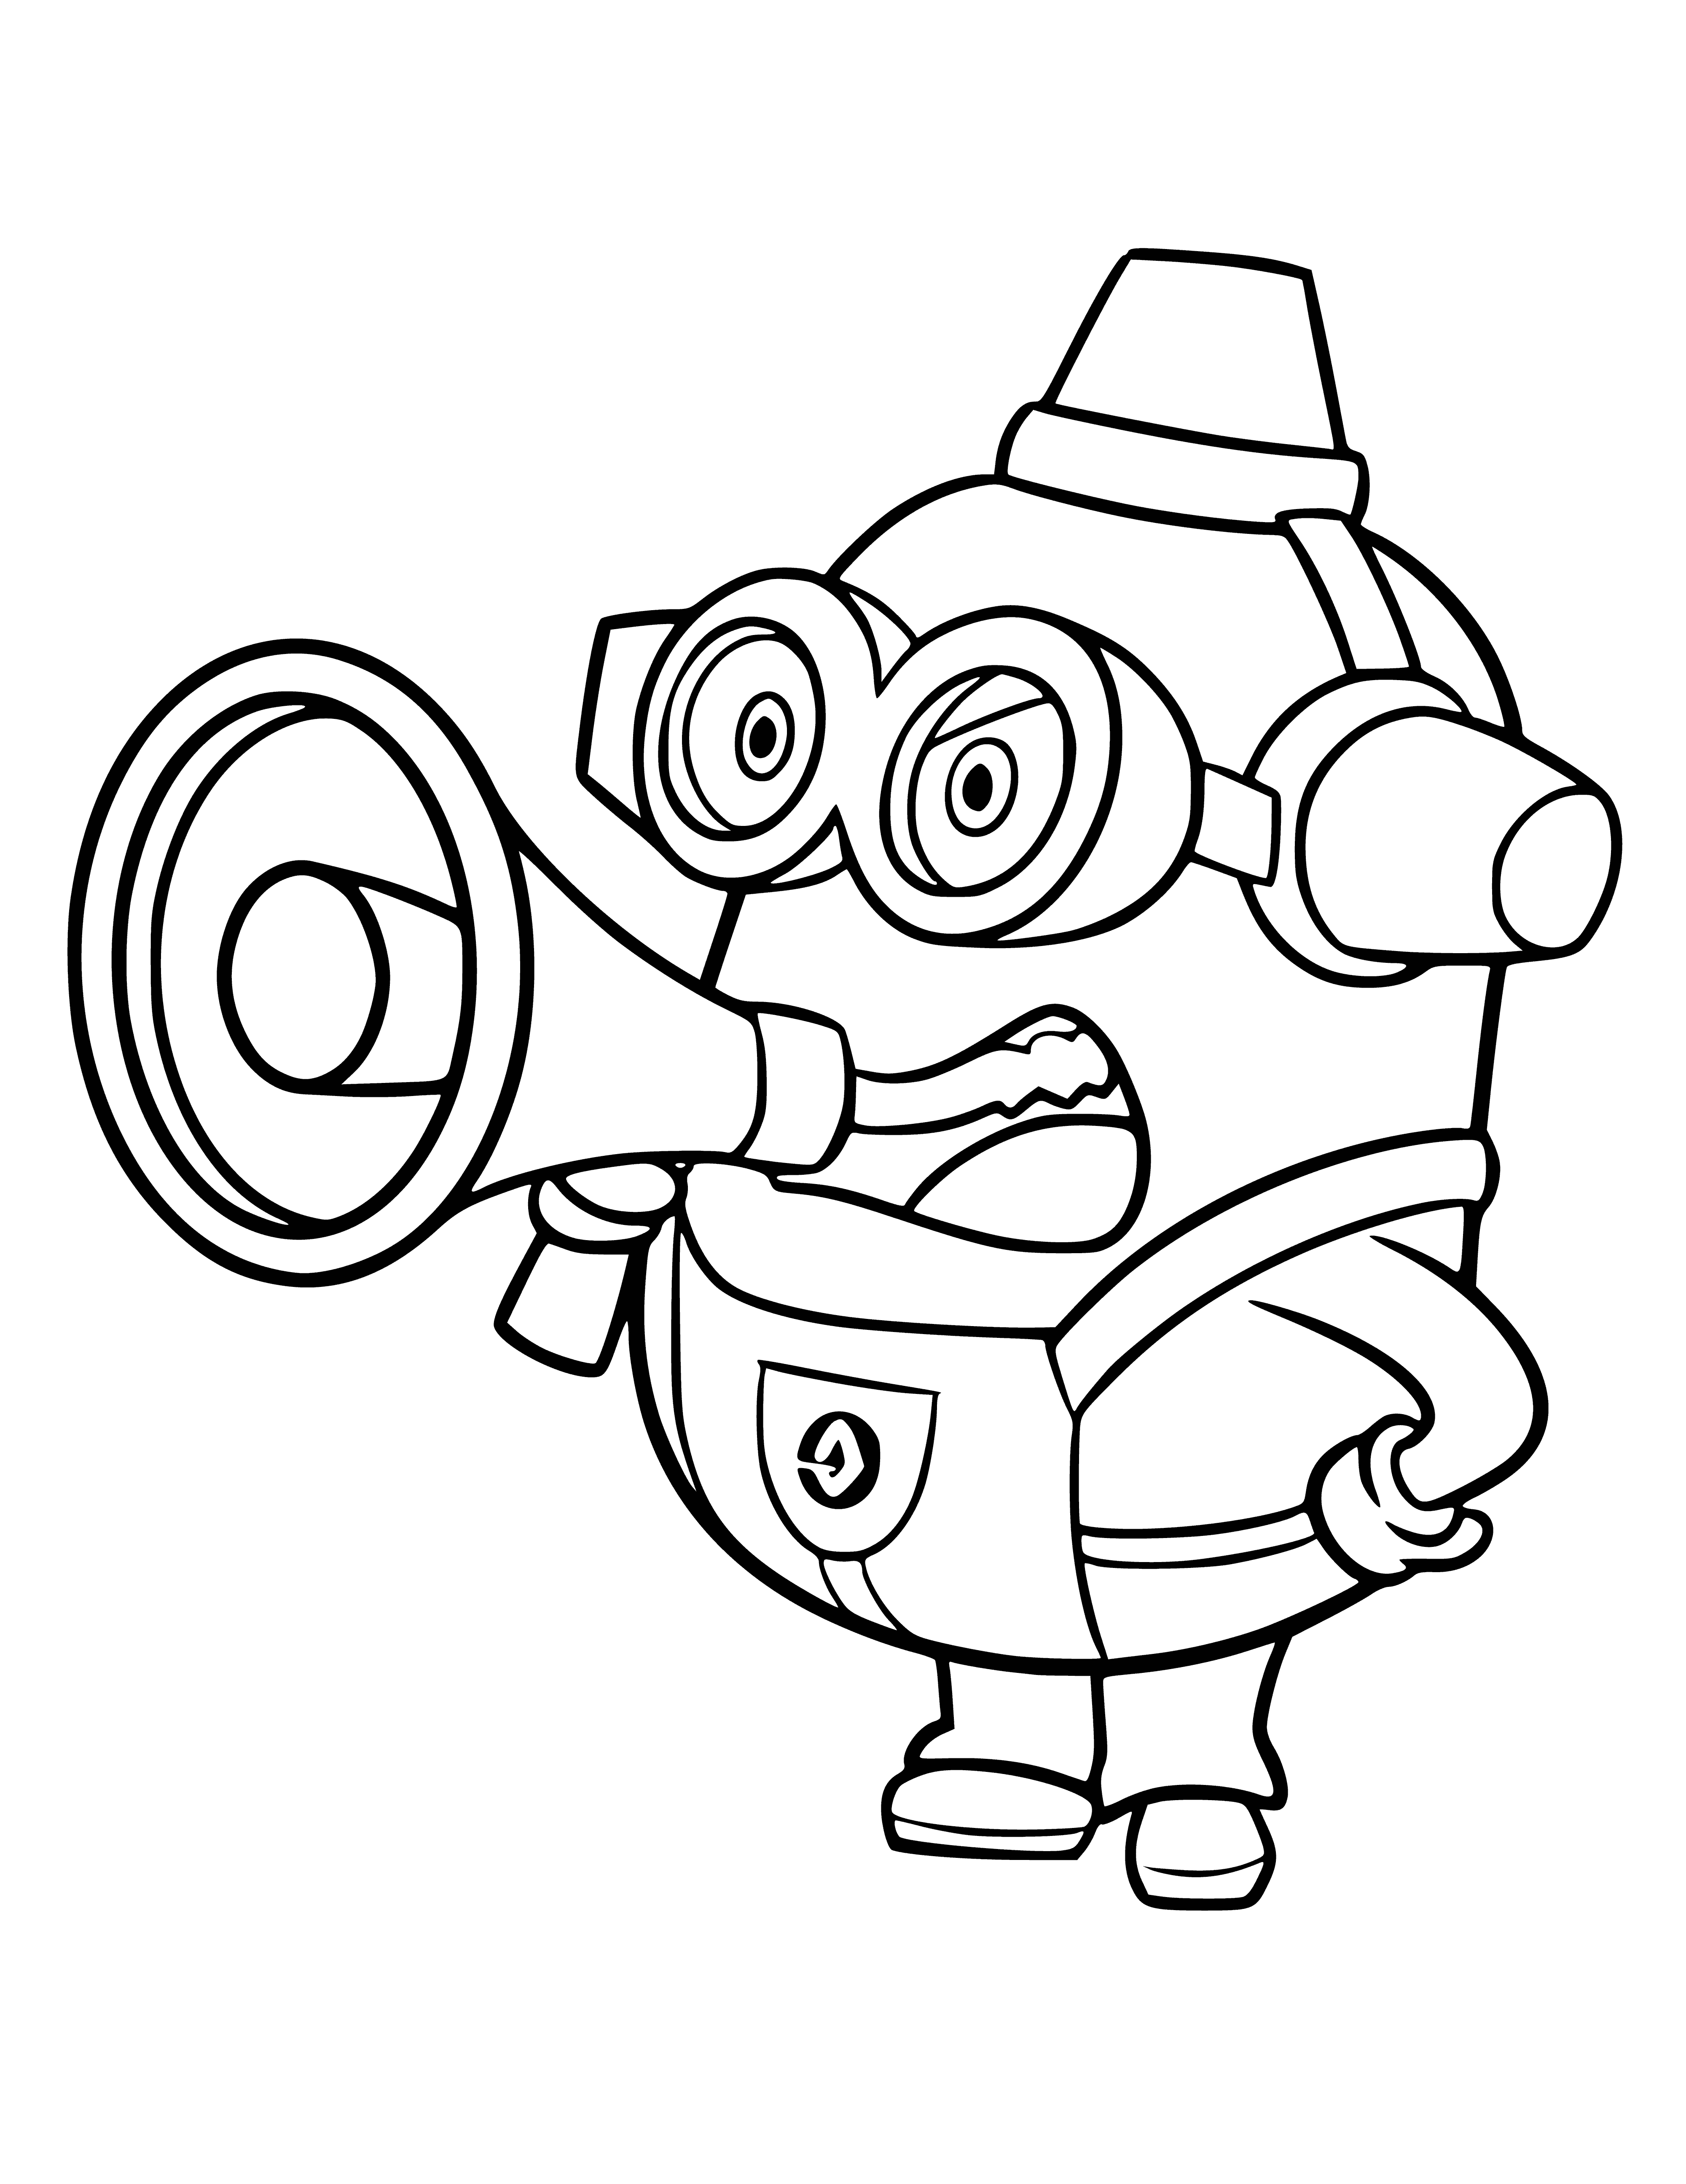 coloring page: Small yellow Minion with blue overalls, 2 eyes, wide mouth & 2 teeth. Holding shield & sword in each hand, it colors a page. #DespicableMe